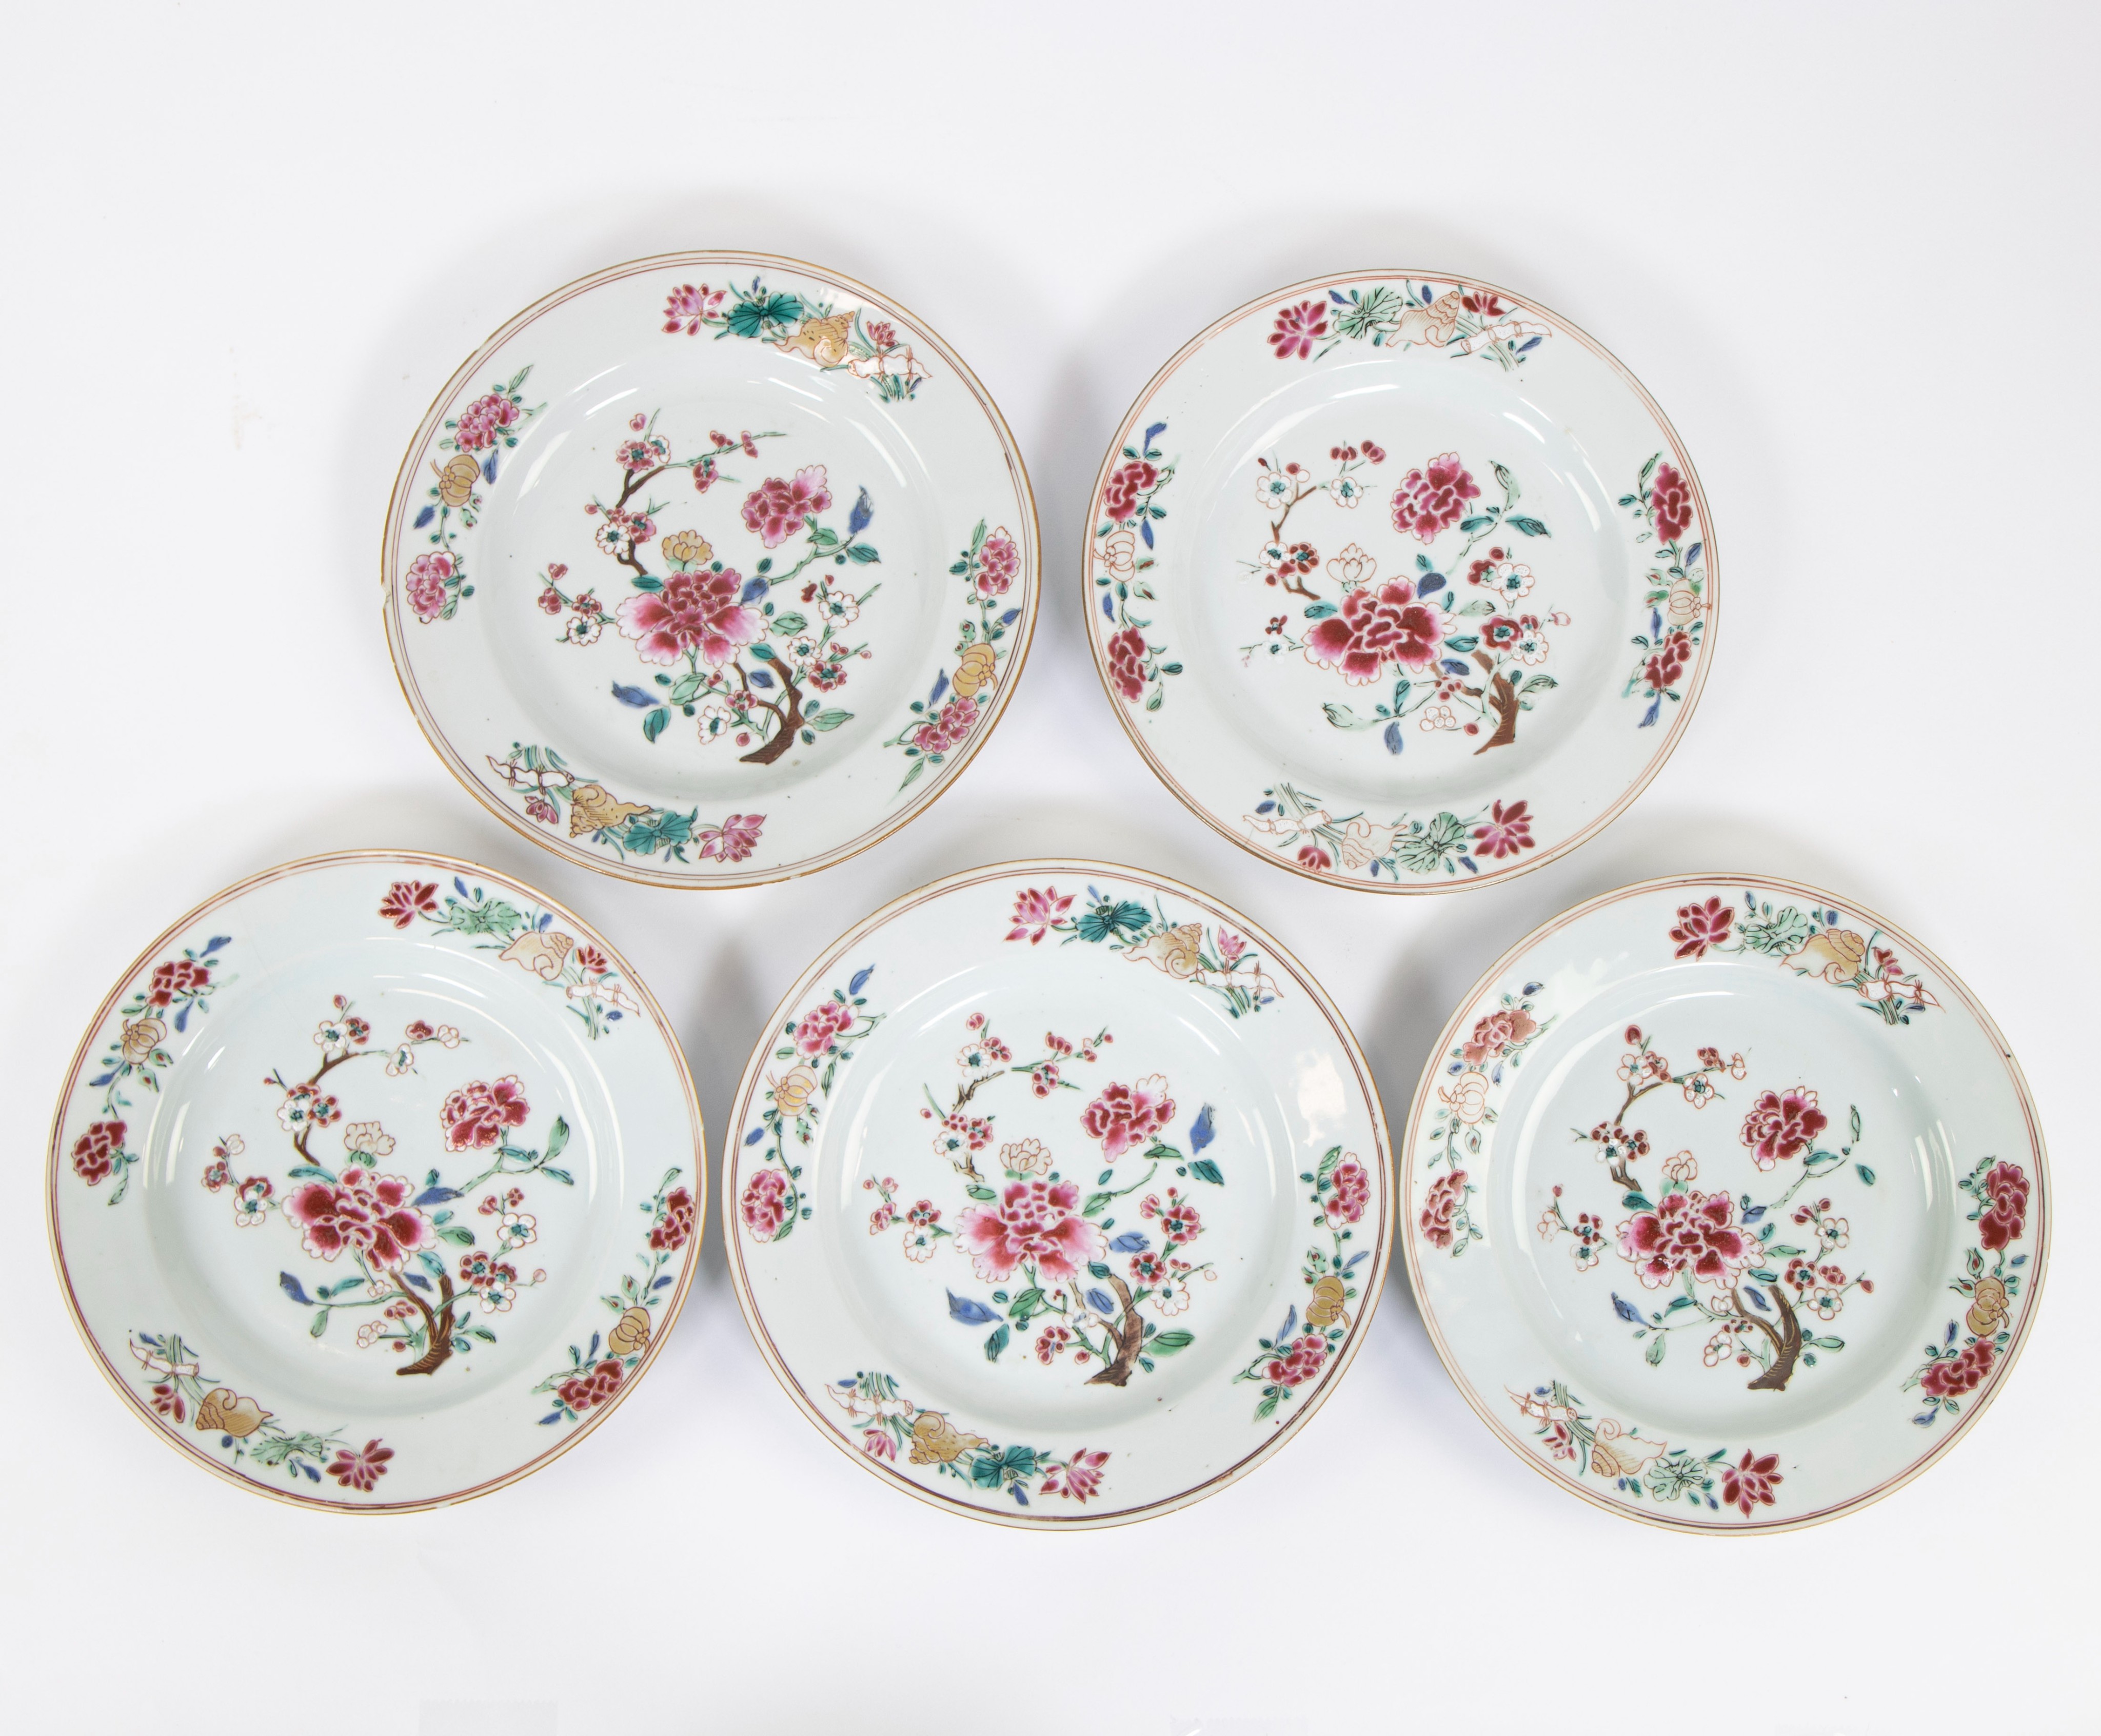 Lot of 5 Chinese famille rose plates, 18th century